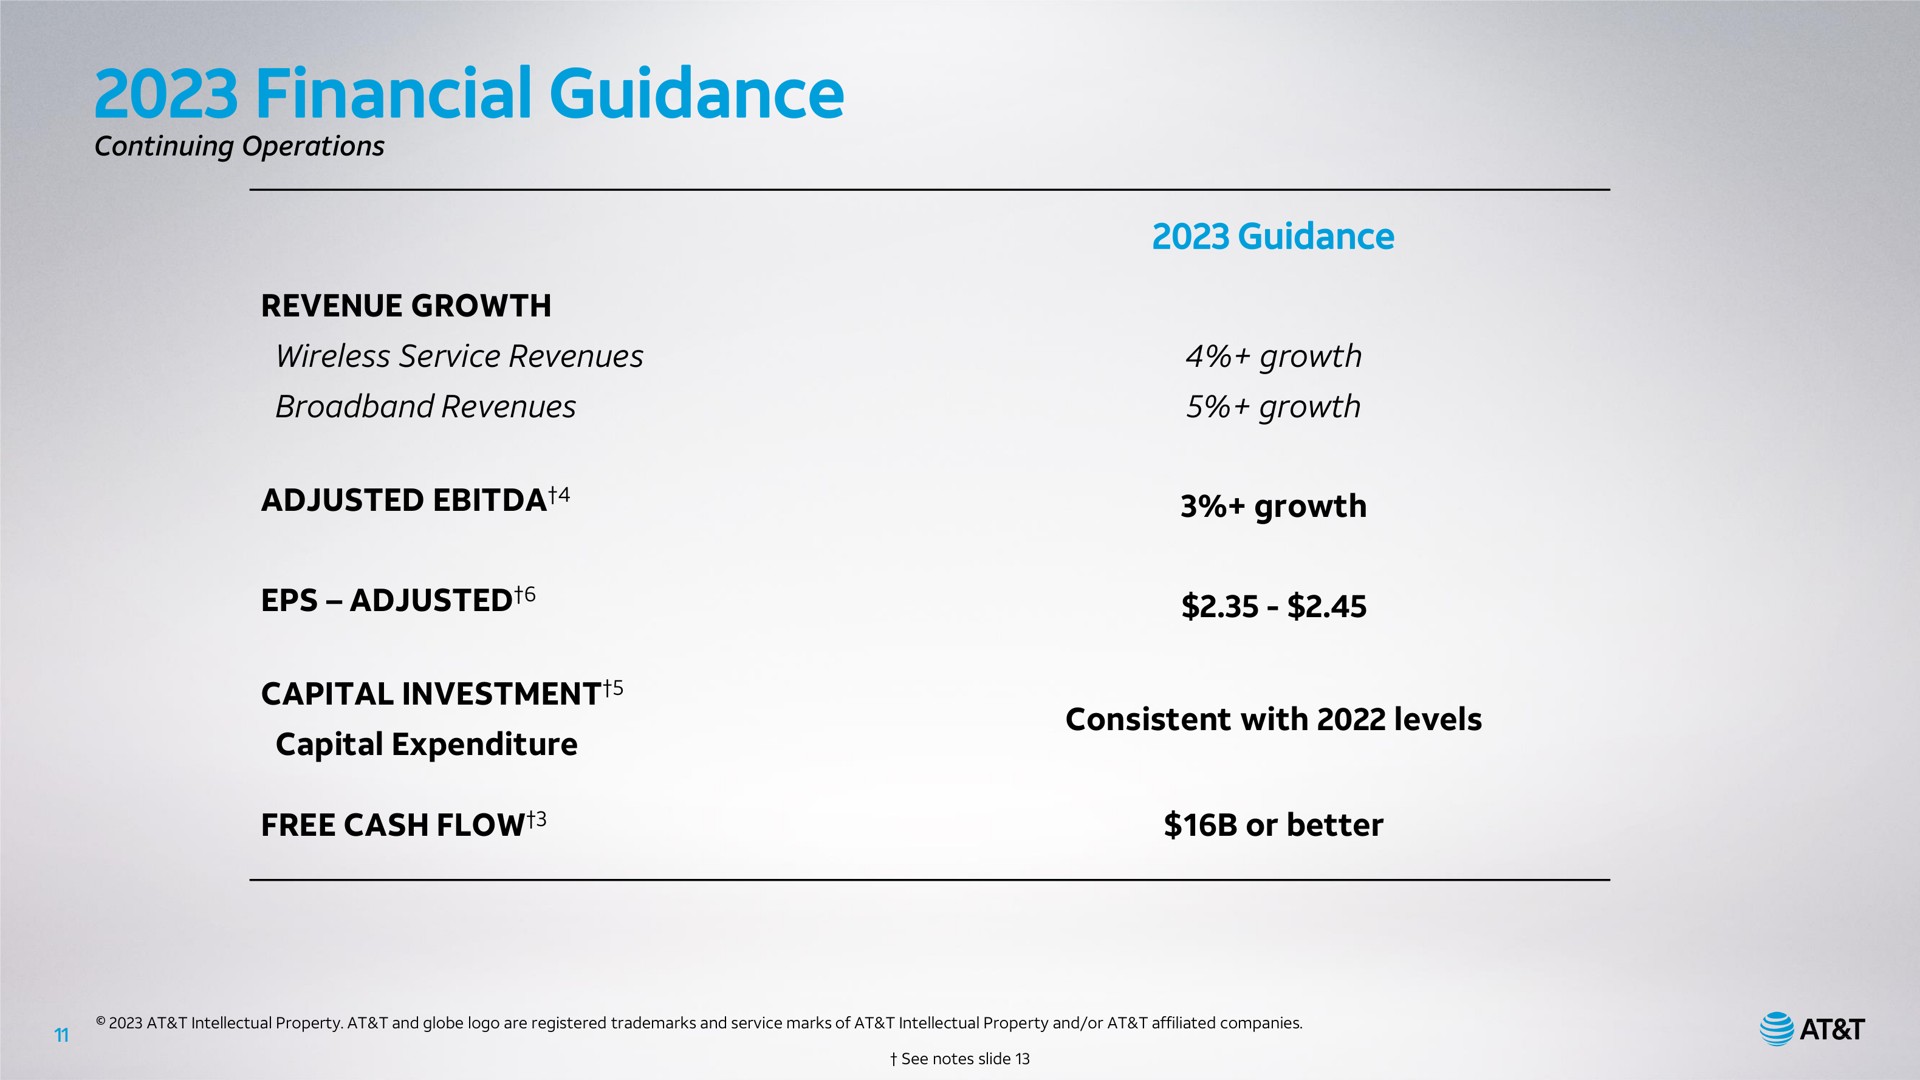 financial guidance continuing operations revenue growth wireless service revenues revenues adjusted adjusted capital investment capital expenditure free cash flow guidance growth growth growth consistent with levels or better | AT&T